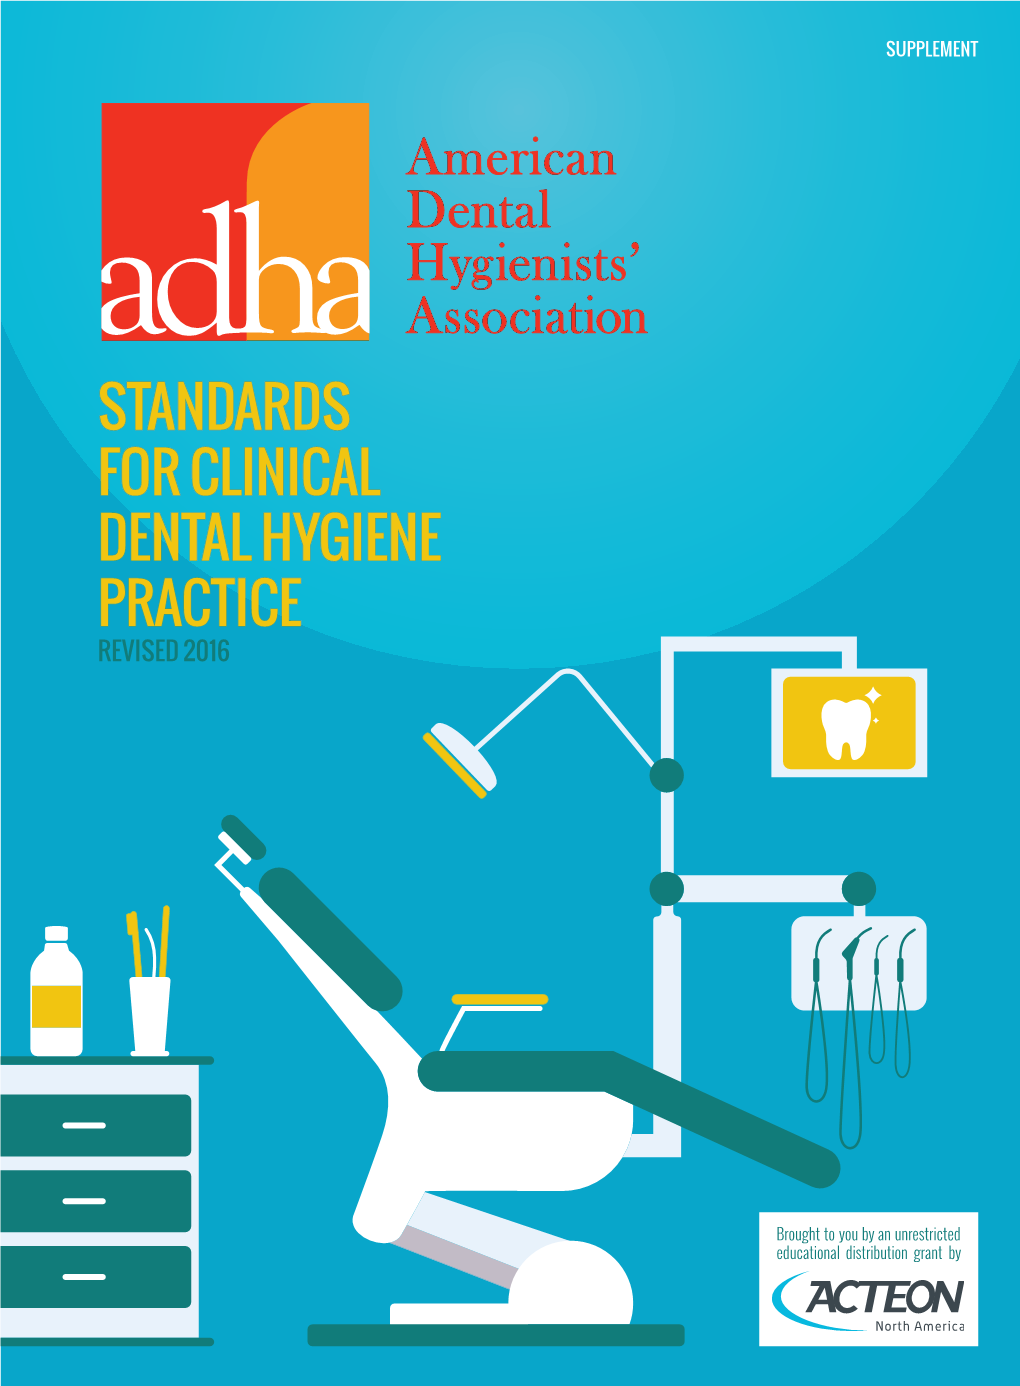 ADHA Standards for Clinical Dental Hygiene Practice